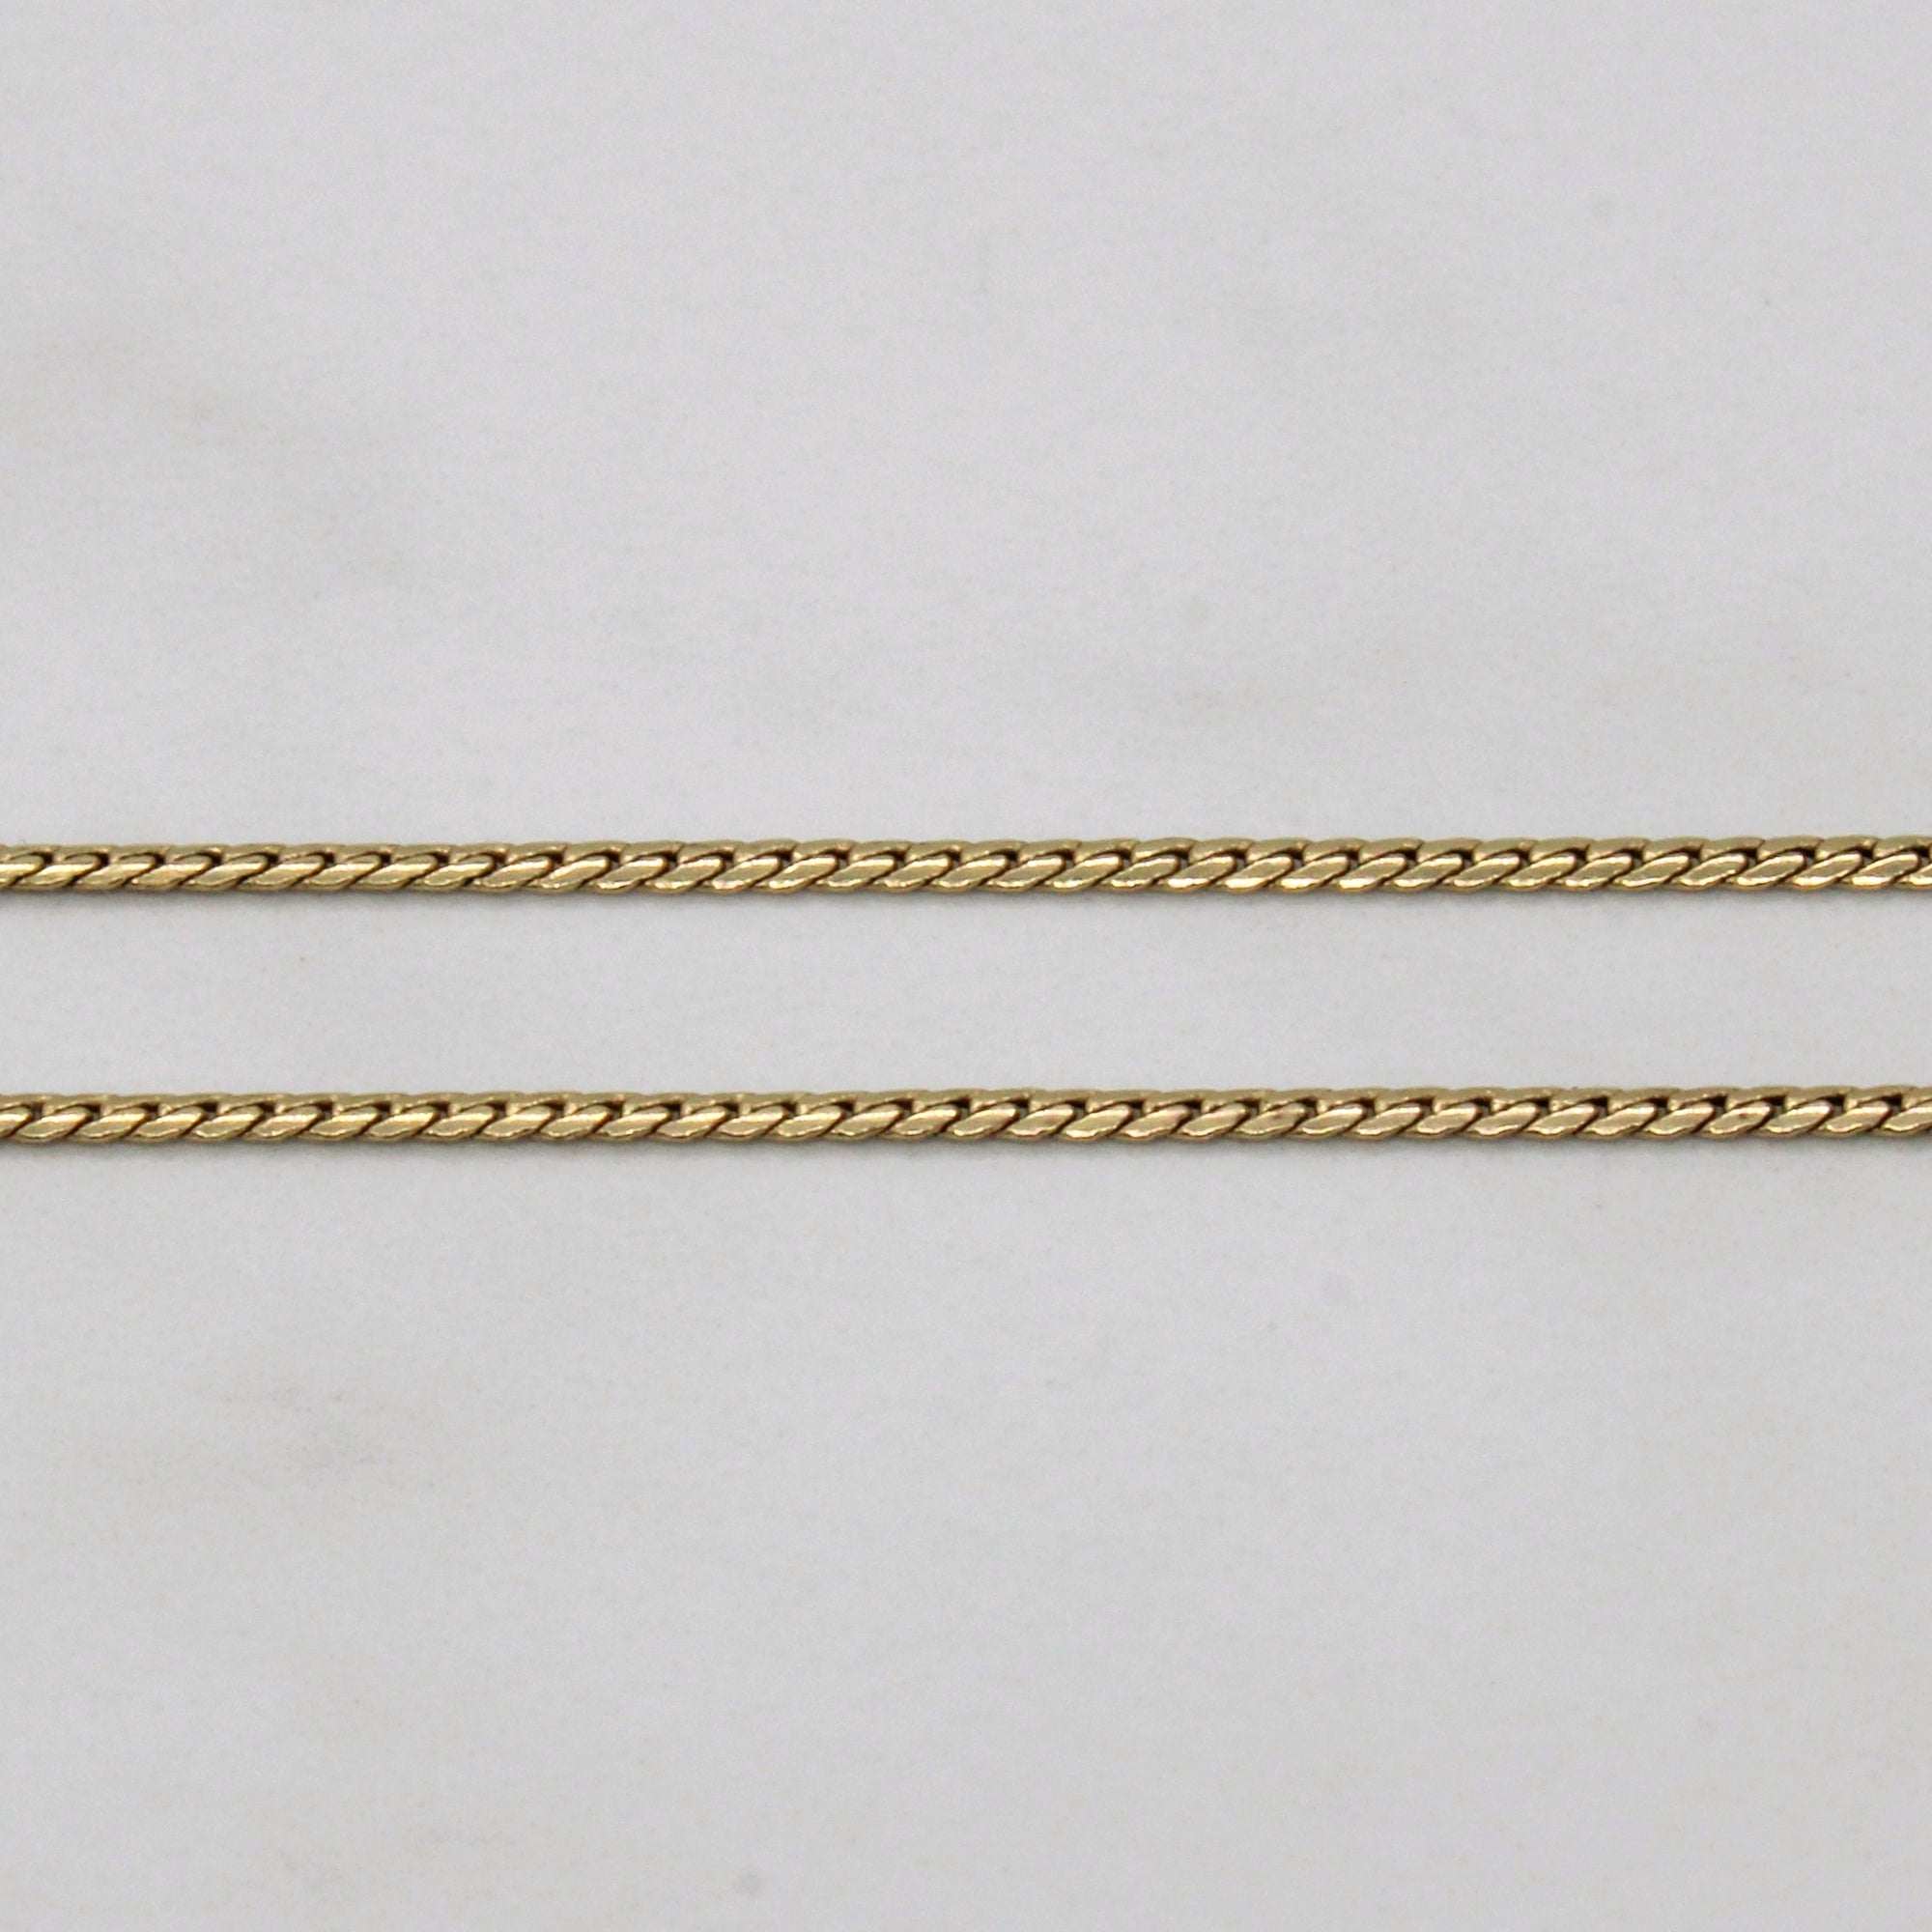 10k Yellow Gold Flat Link Chain | 20